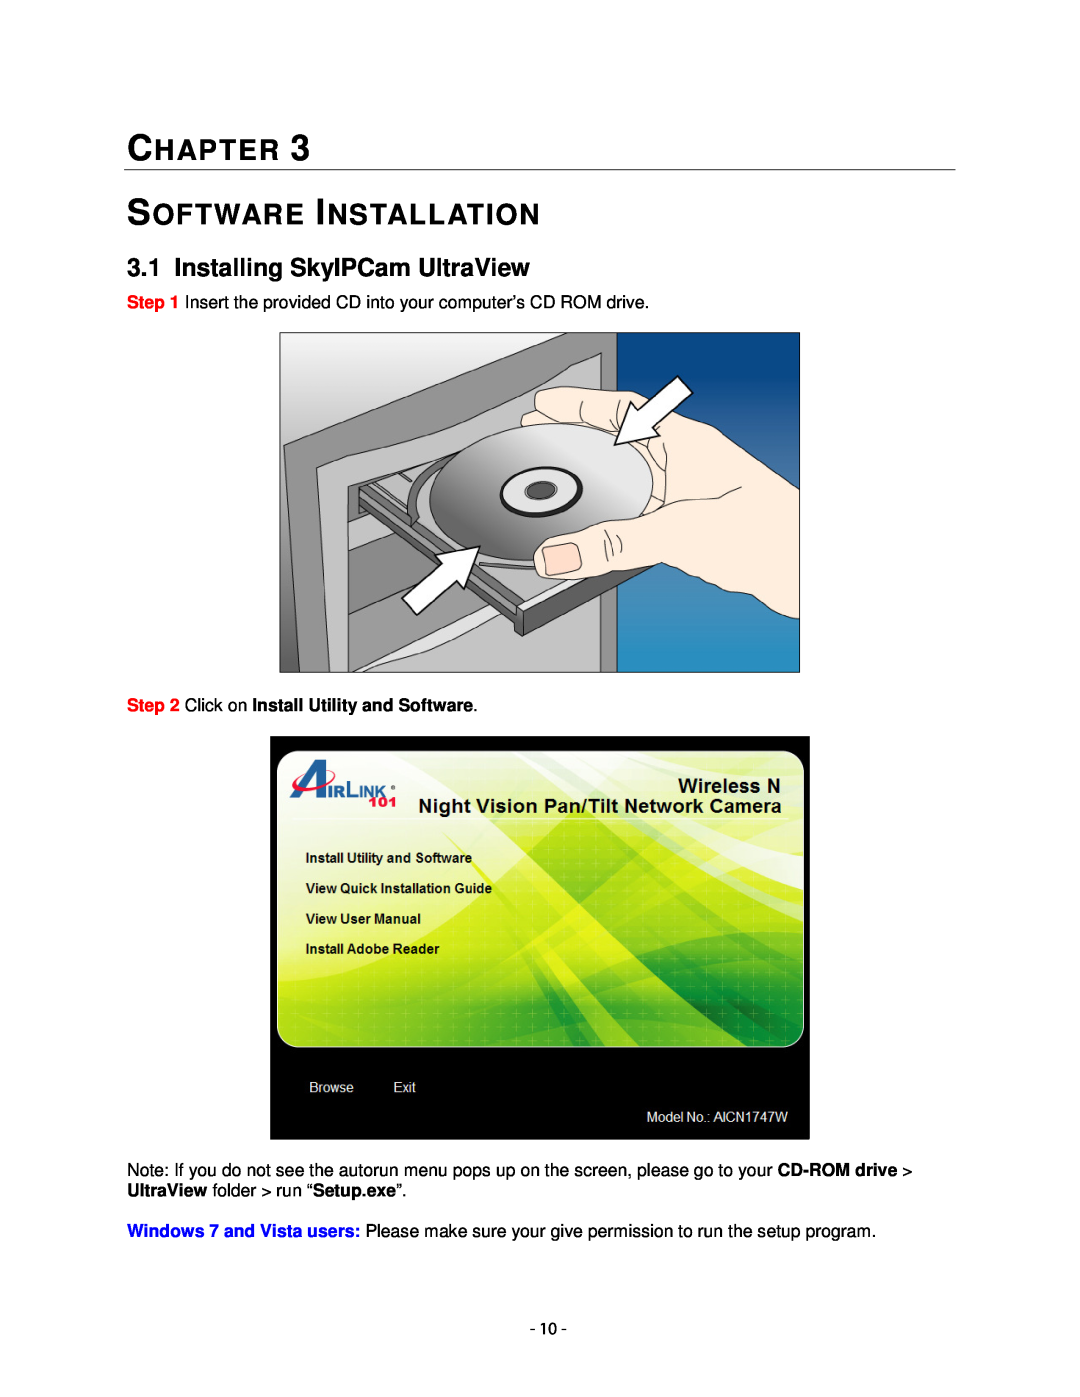 Airlink101 AICN1747W Software Installation, Installing SkyIPCam UltraView, Chapter, Click on Install Utility and Software 